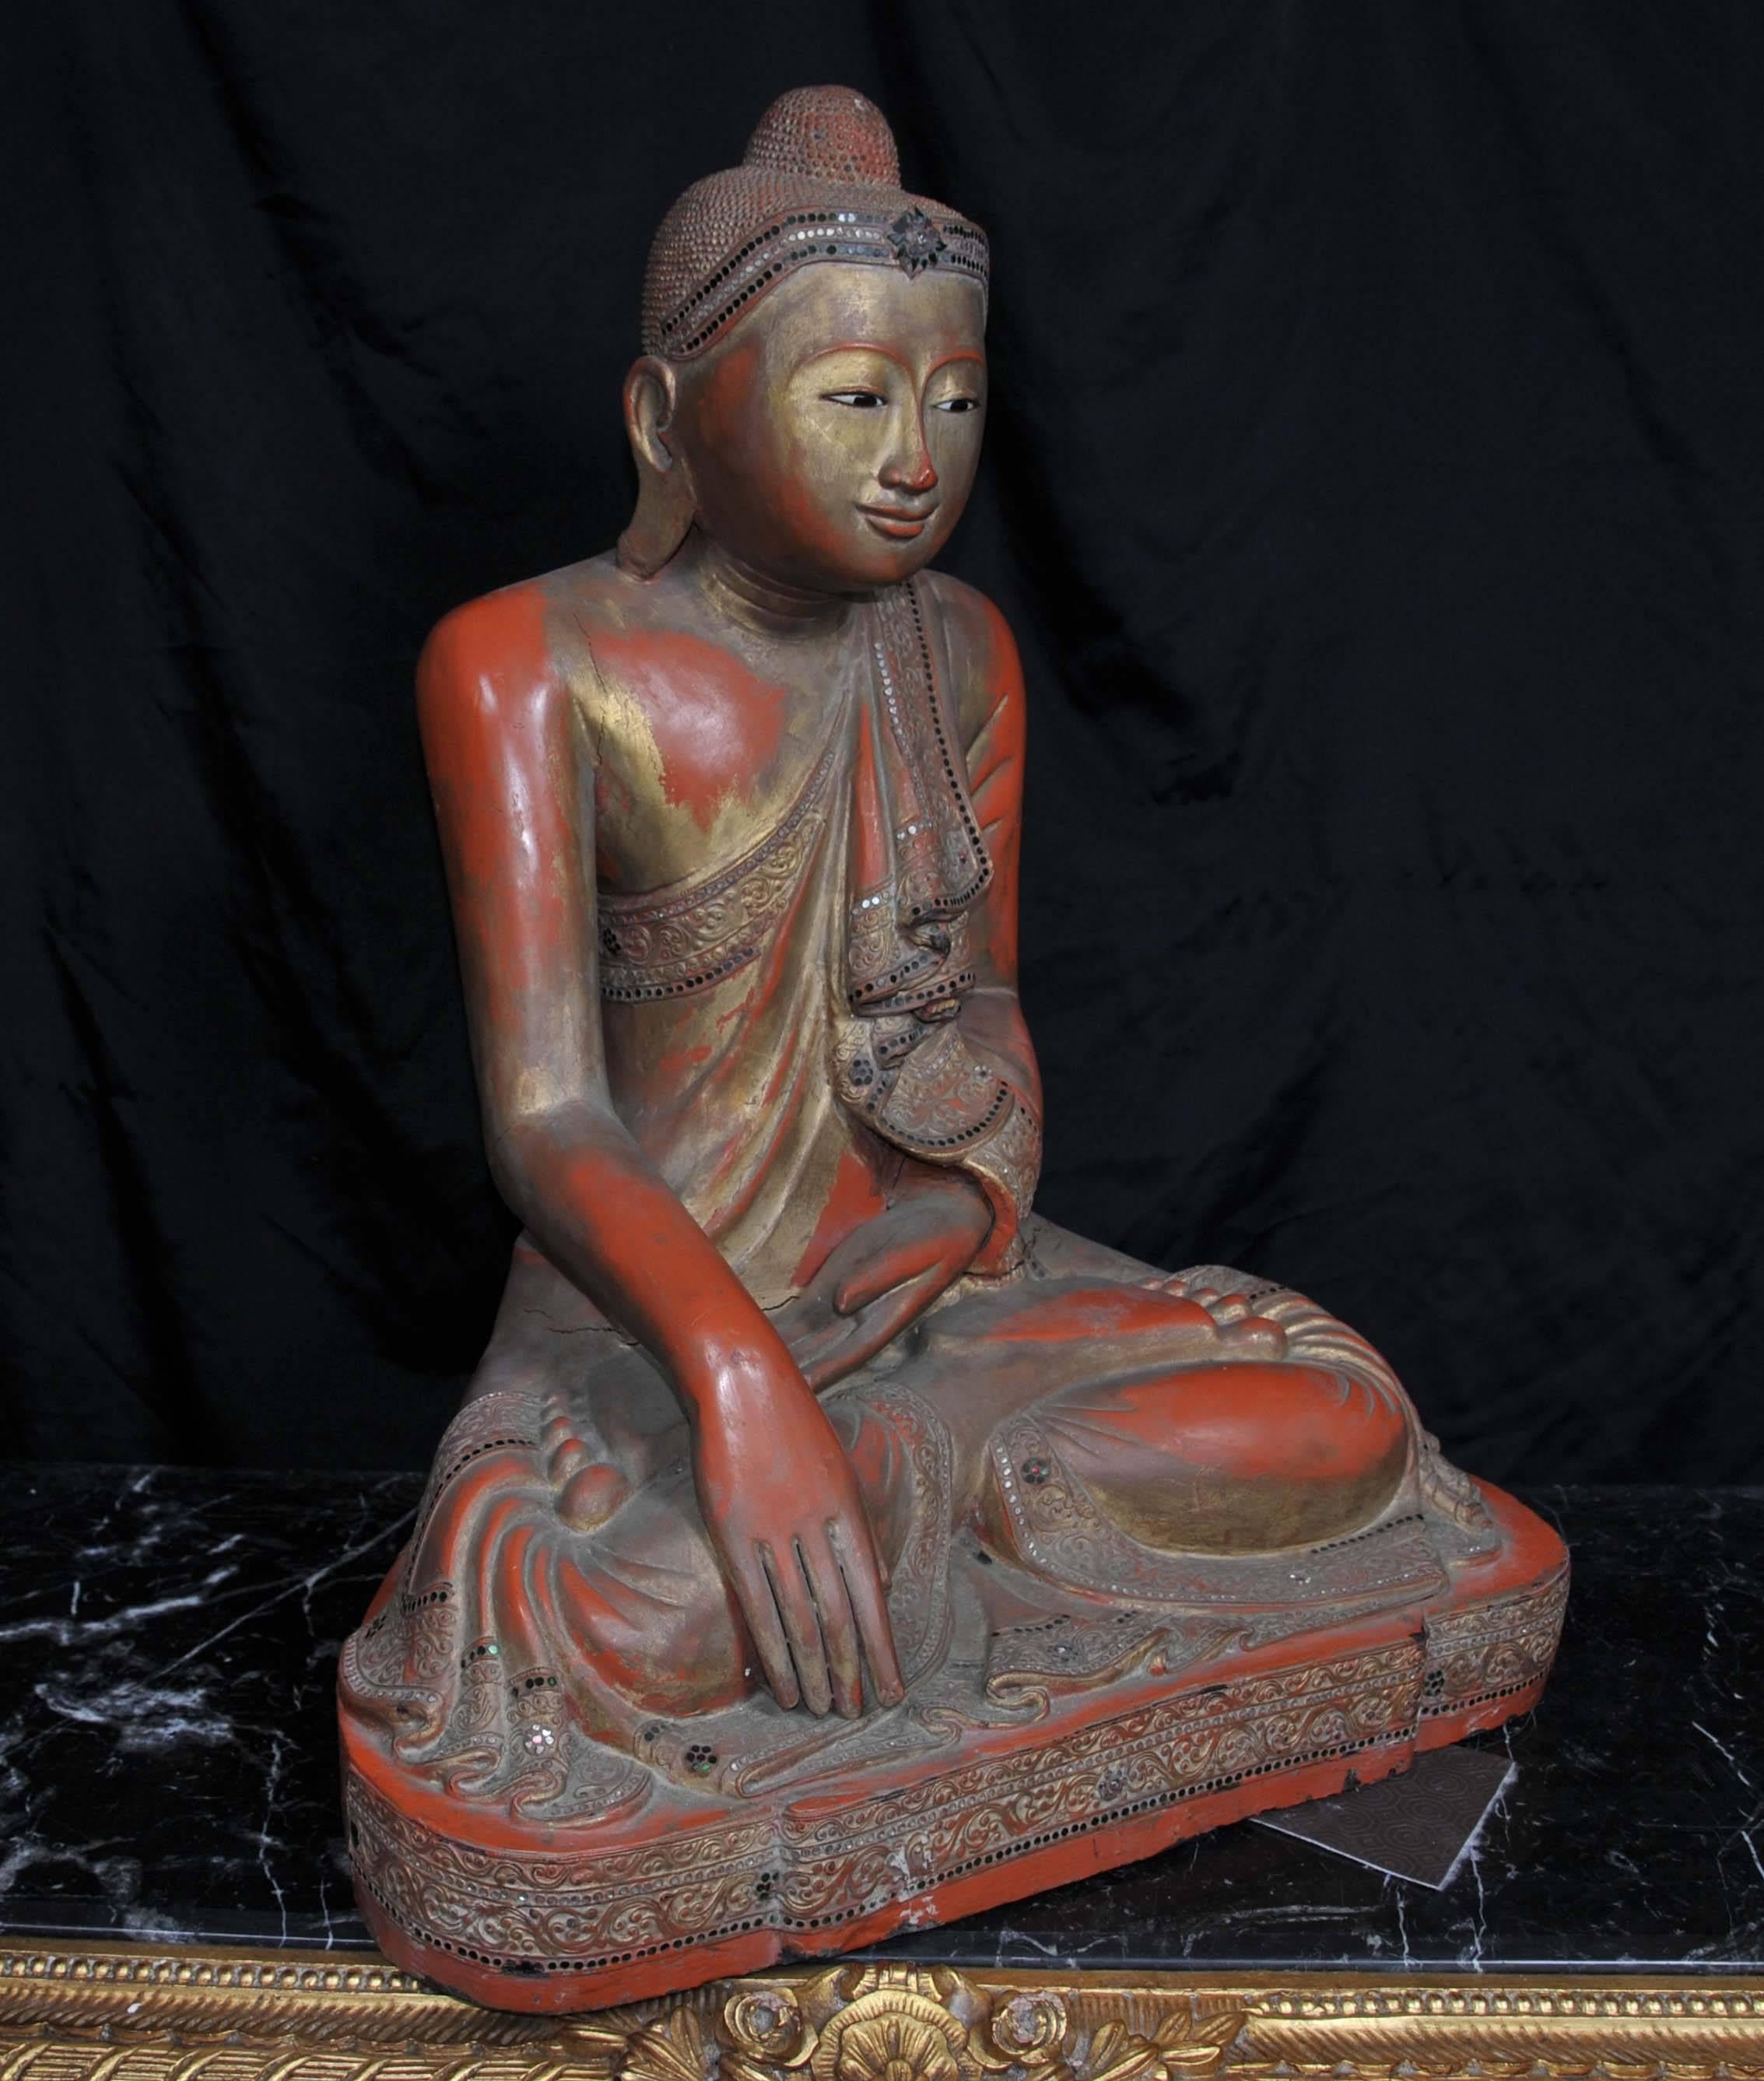 Burmese red lacquered seated figure of Buddha, late 20th century
Add serenity and compassion to any interior with this fab piece.
Classic lotus pose of the statue with elongated hands.
Wood has a red finish with gold tints.
Bought from a dealer